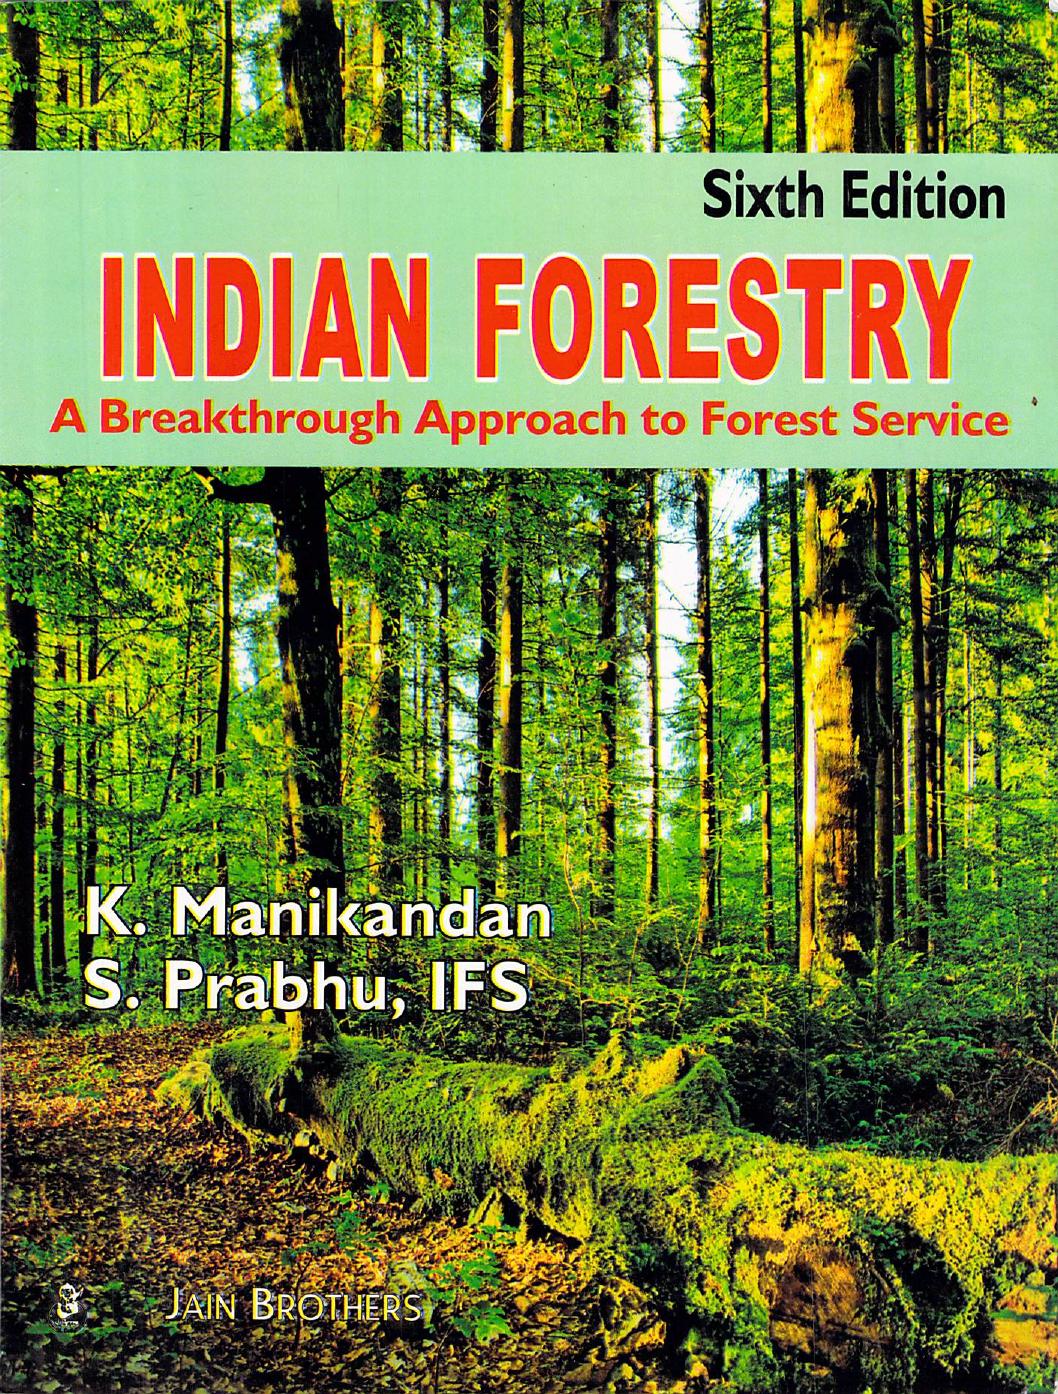 Indian Forestry A Breakthrough Approach to Forest Service by K. Manikandan S. Prabhu